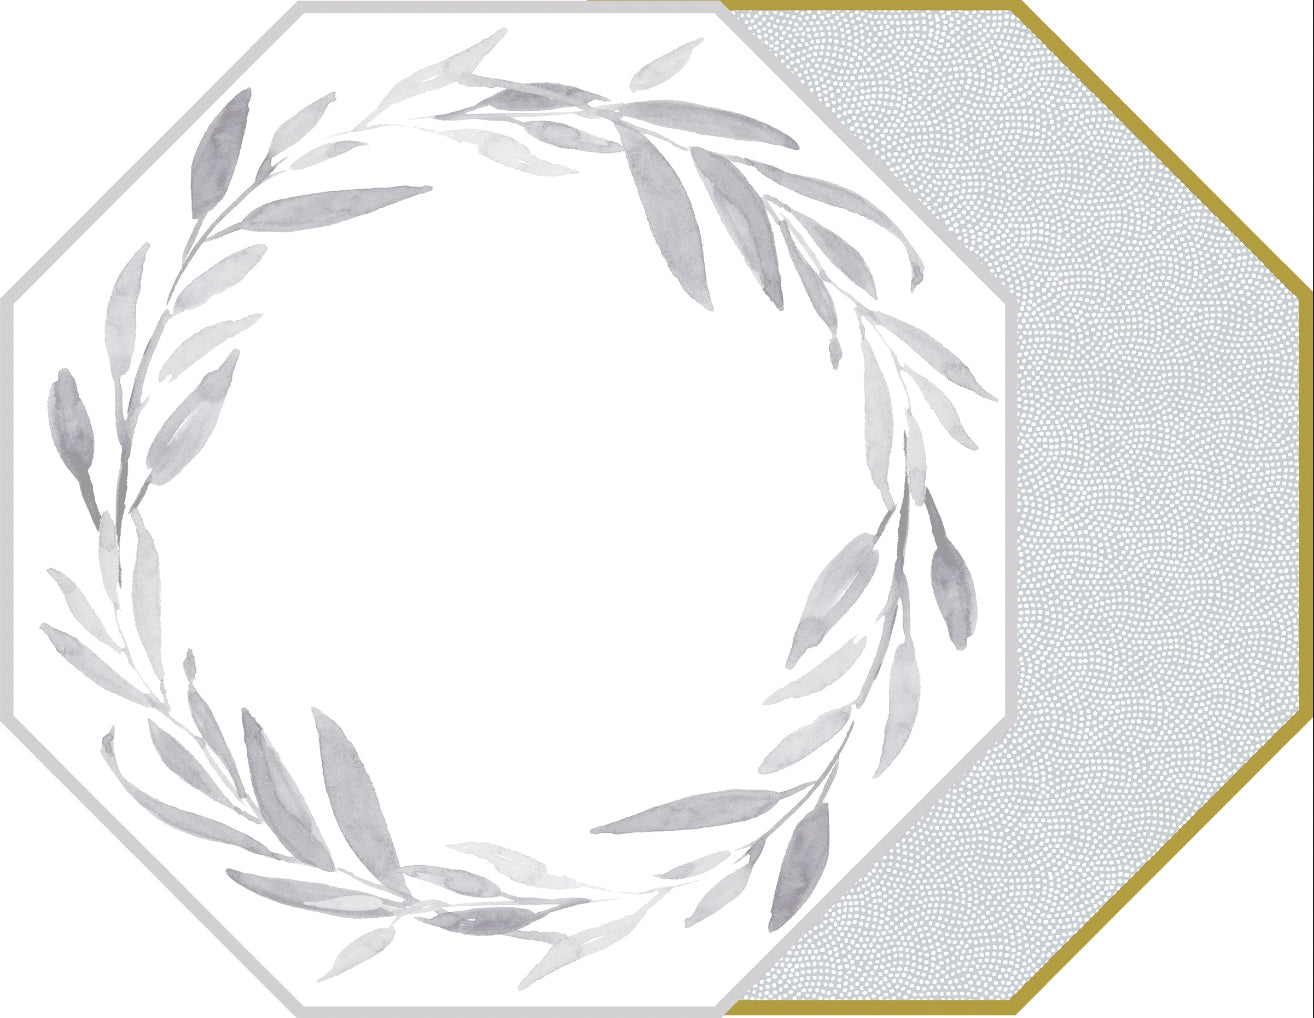 OCTAGONAL TWO SIDED LEAVES WREATH PLACEMAT WITH DOT FAN ~ GRAY